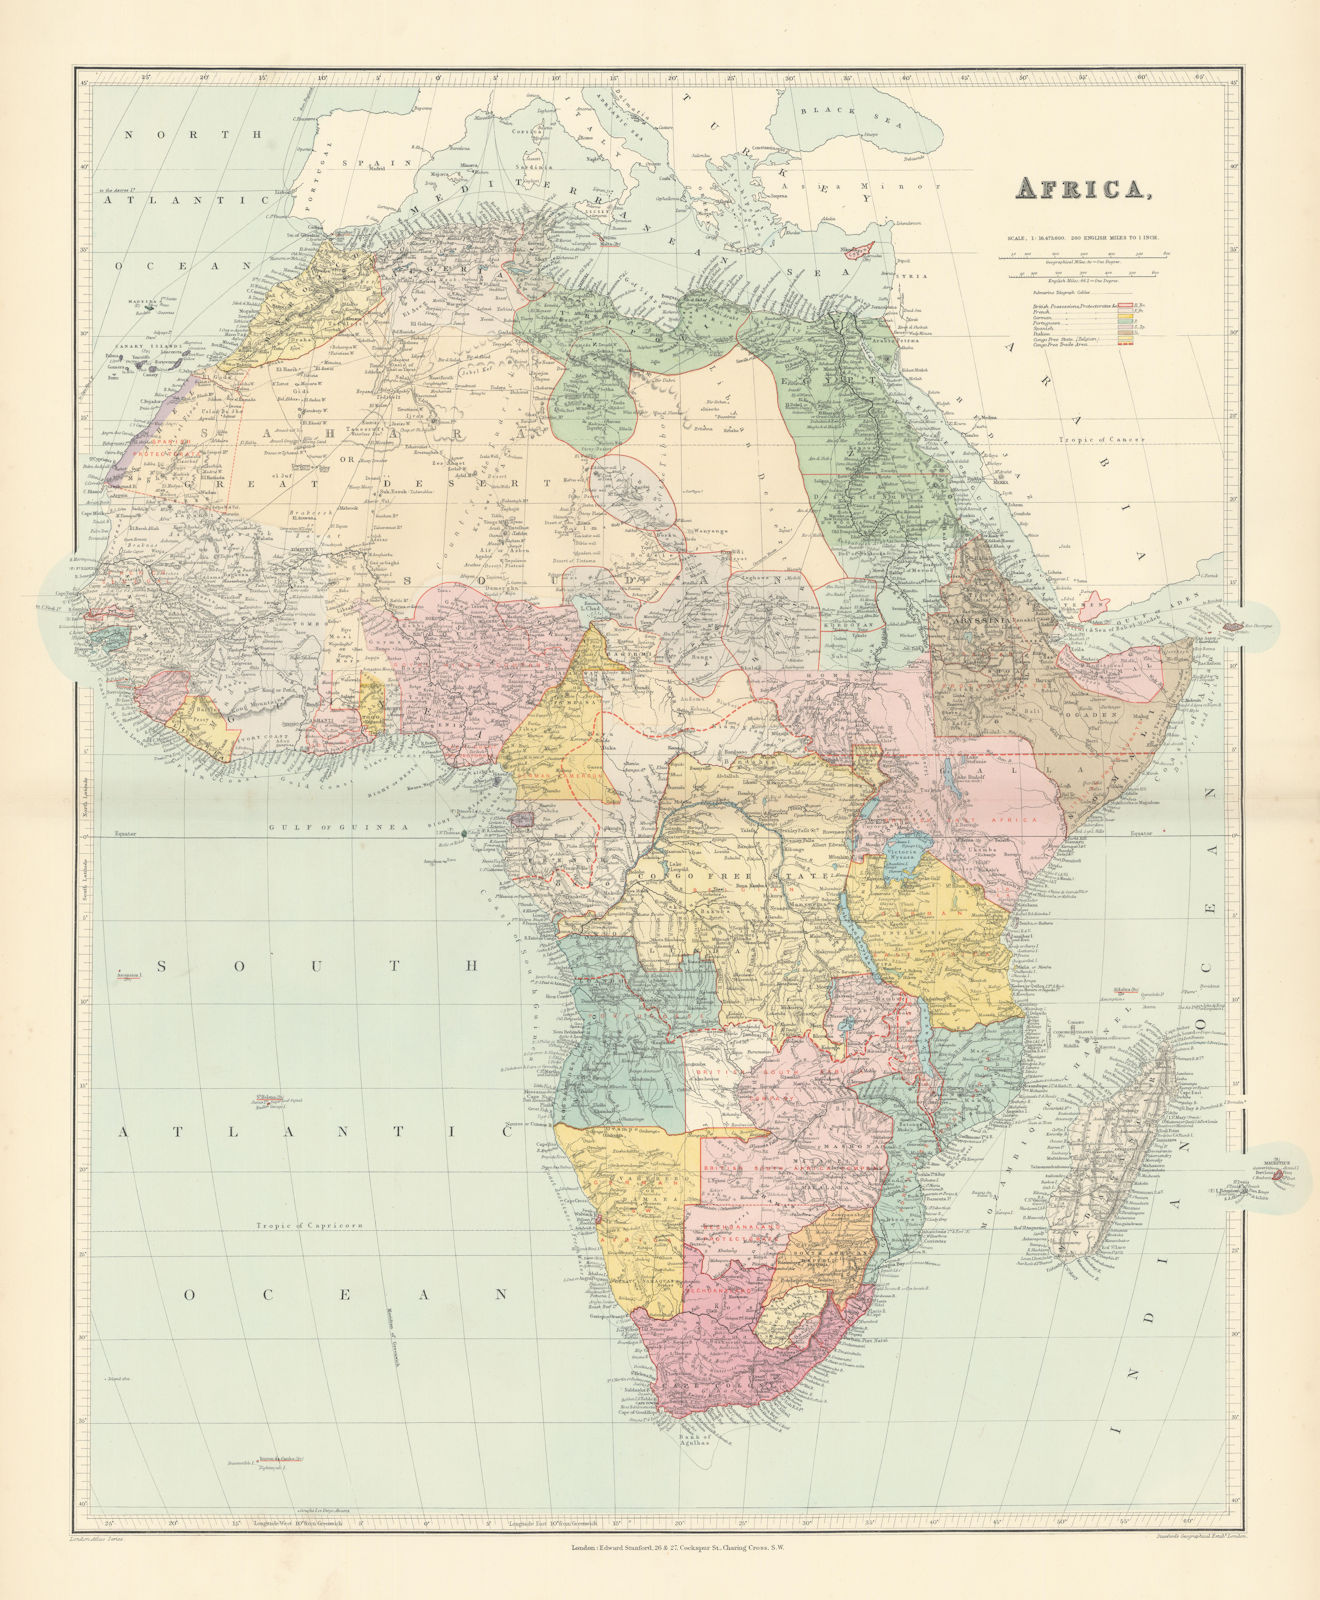 Africa. Congo Free Trade Area. British South Africa Company. STANFORD 1896 map